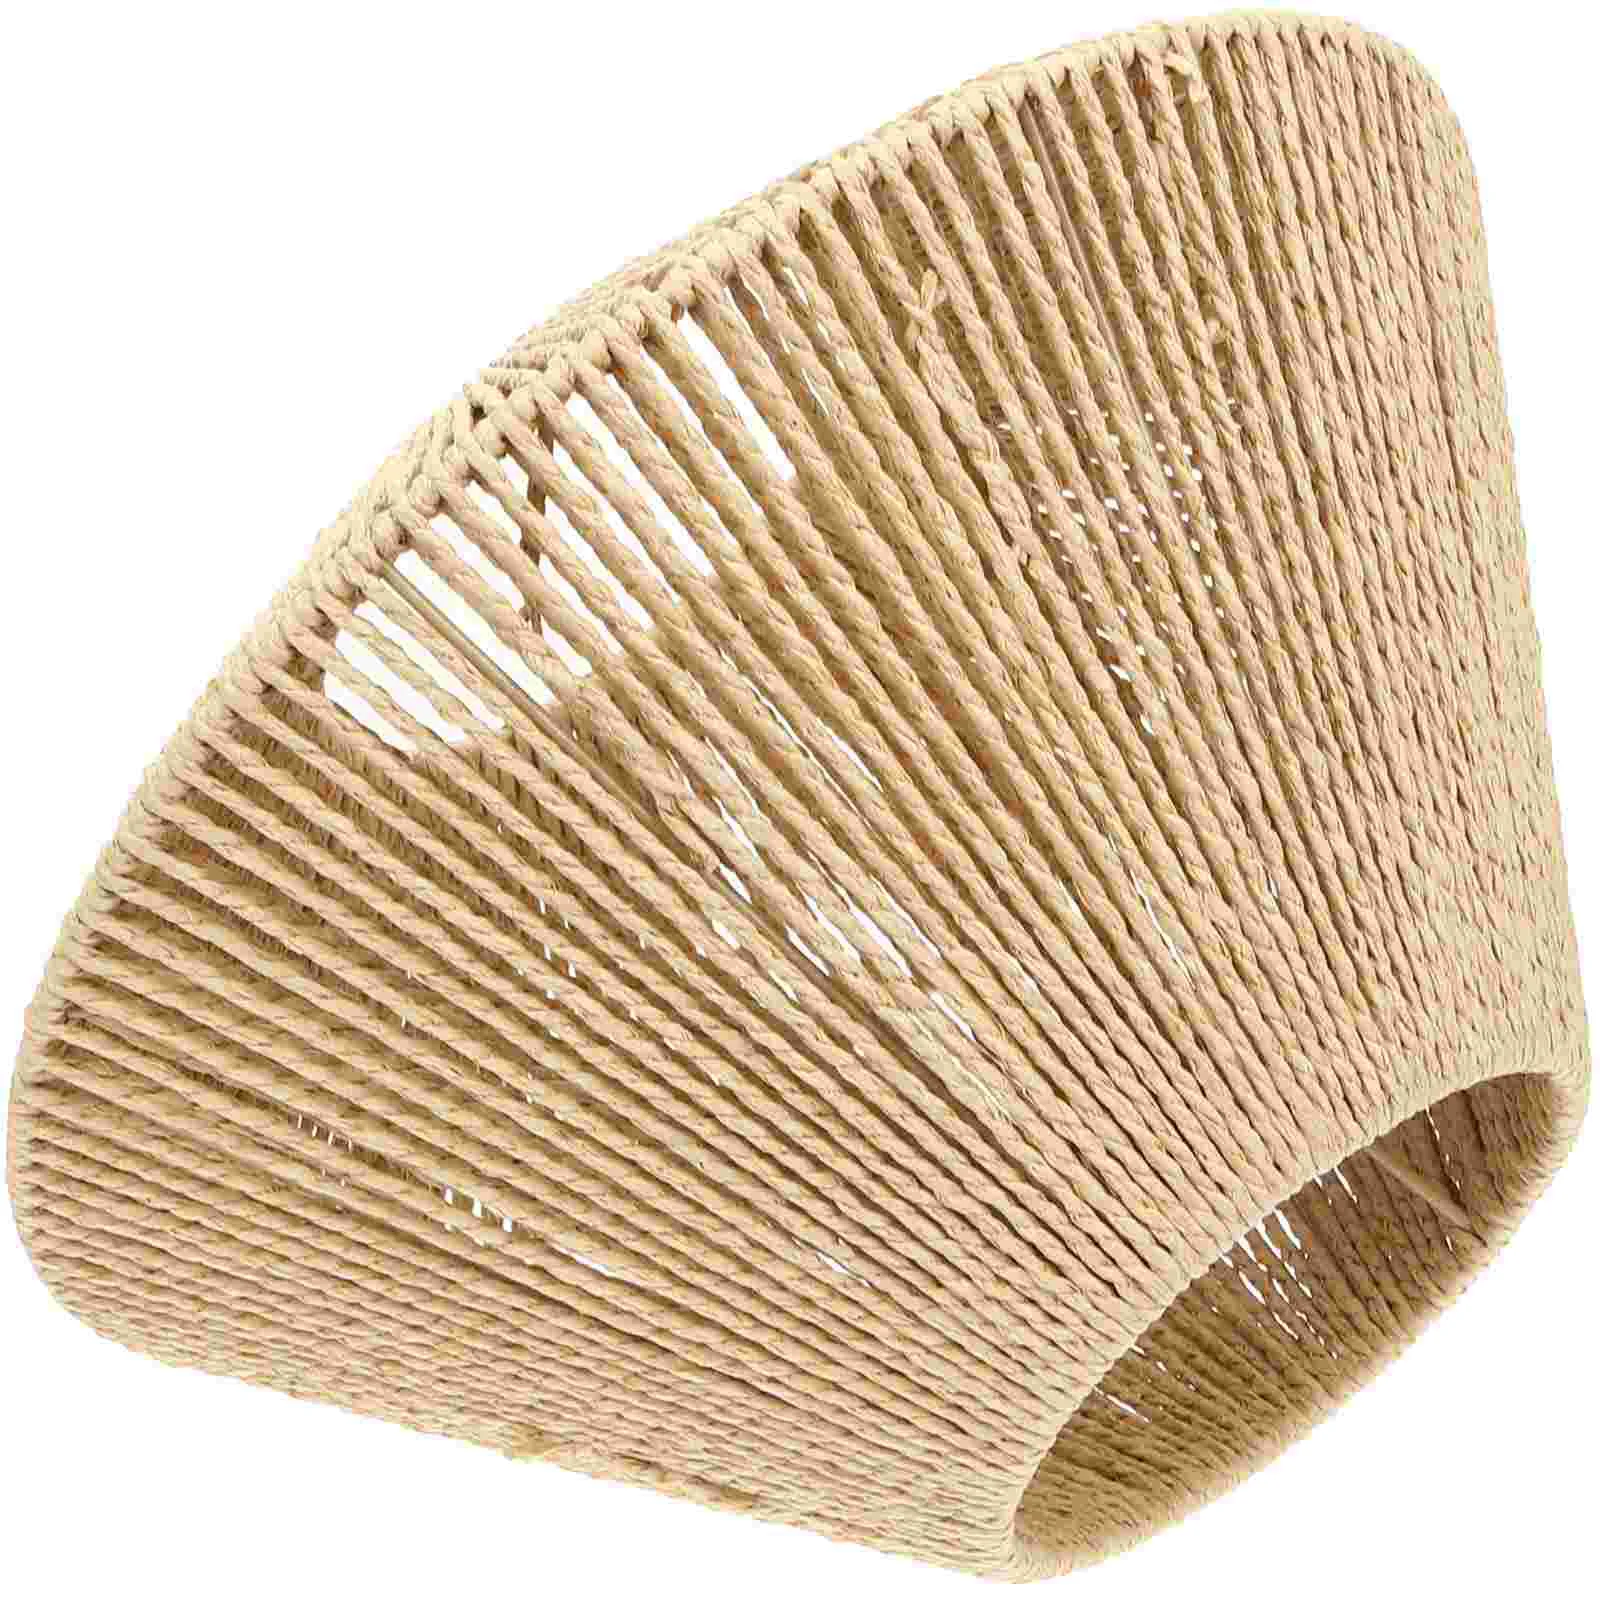 

Rattan Lampshade Table Ceiling Shades Pendant Light Cover Straw Woven Accessory Rustic Decor Ratan Wicker